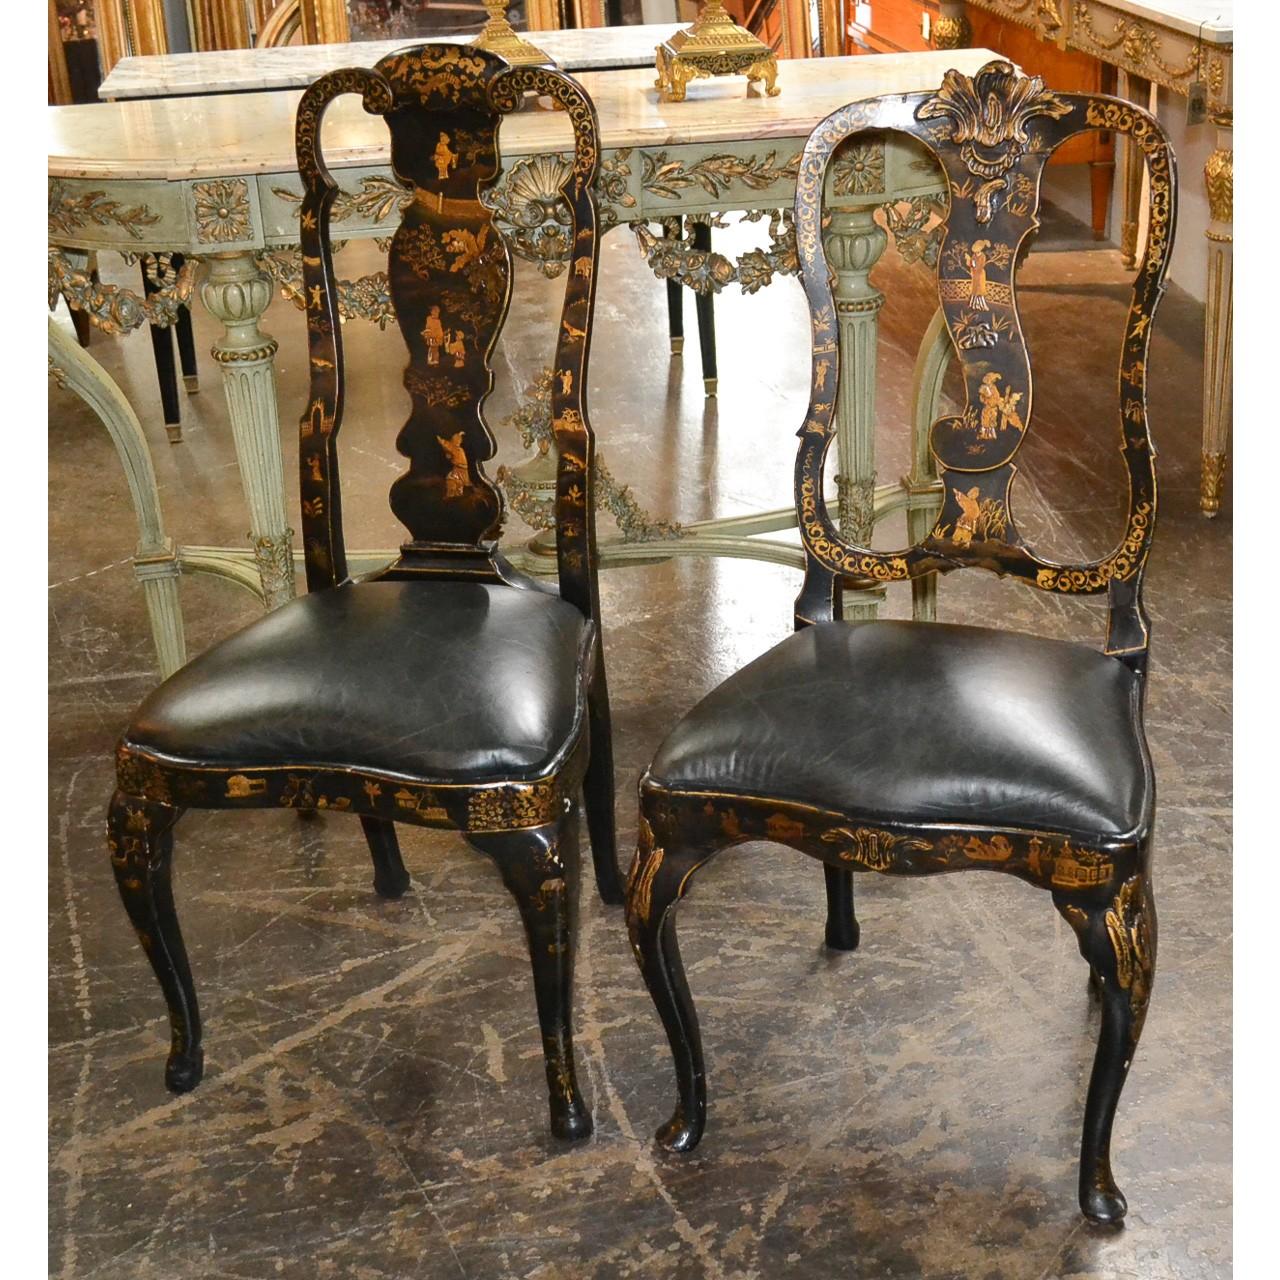 Antique pair of companion English black chinoiserie side chairs with black leather seats, circa 1840.
This pair of mis-matched chairs work so well together with each one having beautiful scenery designs. A designers dream find. Made in England.